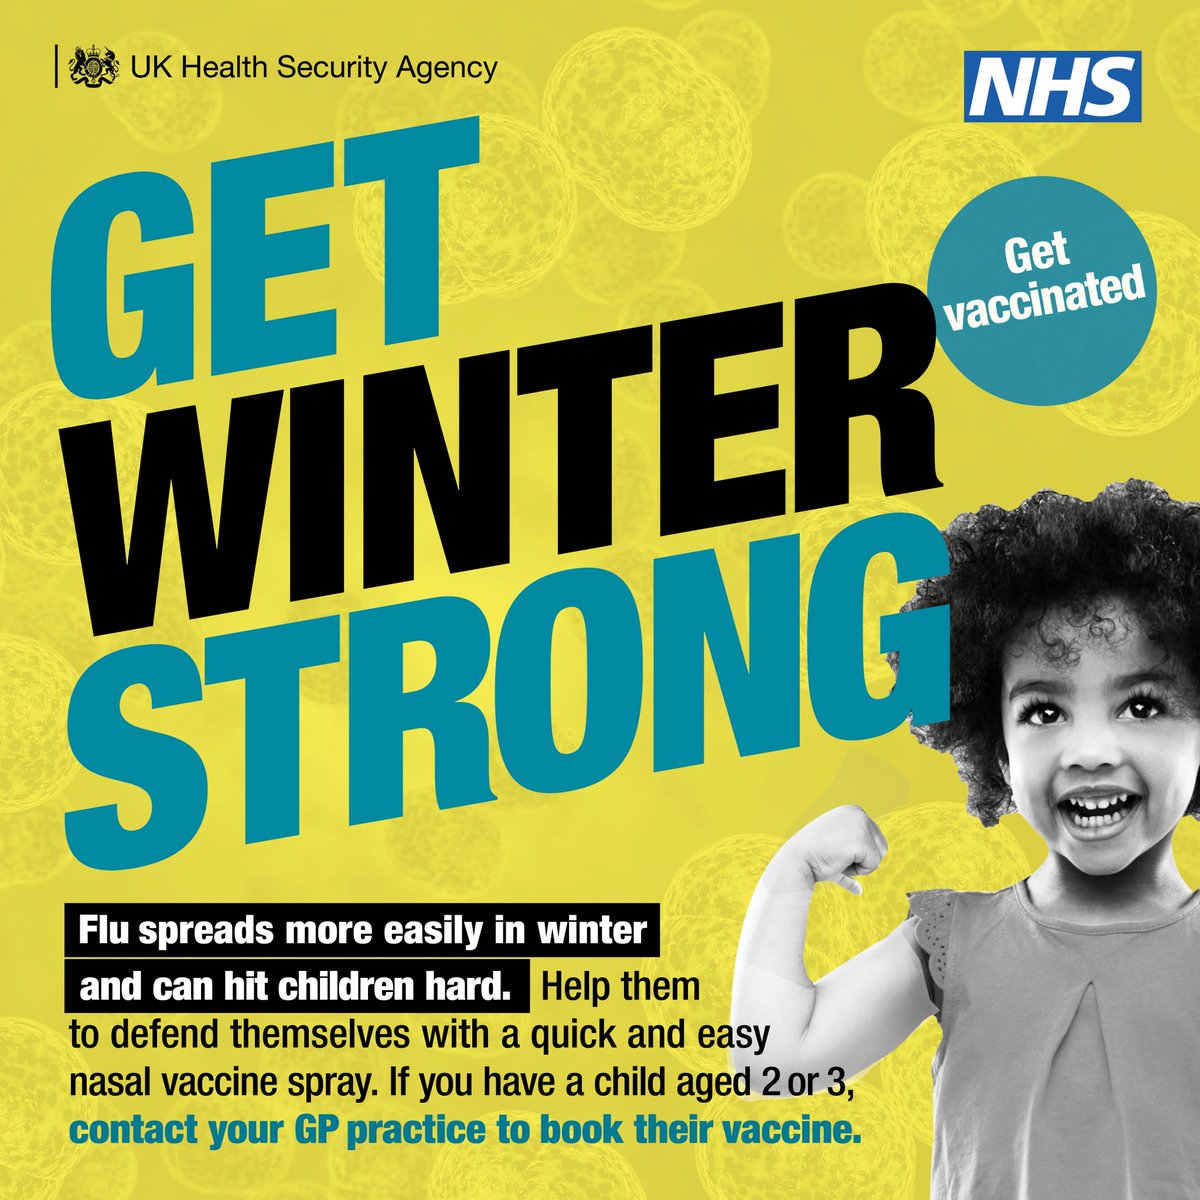 The nasal spray flu vaccine is quick, easy and helps protect children against serious illness this winter. Let’s #GetWinterStrong If your child is aged 2 or 3, contact your GP practice to book their vaccine.